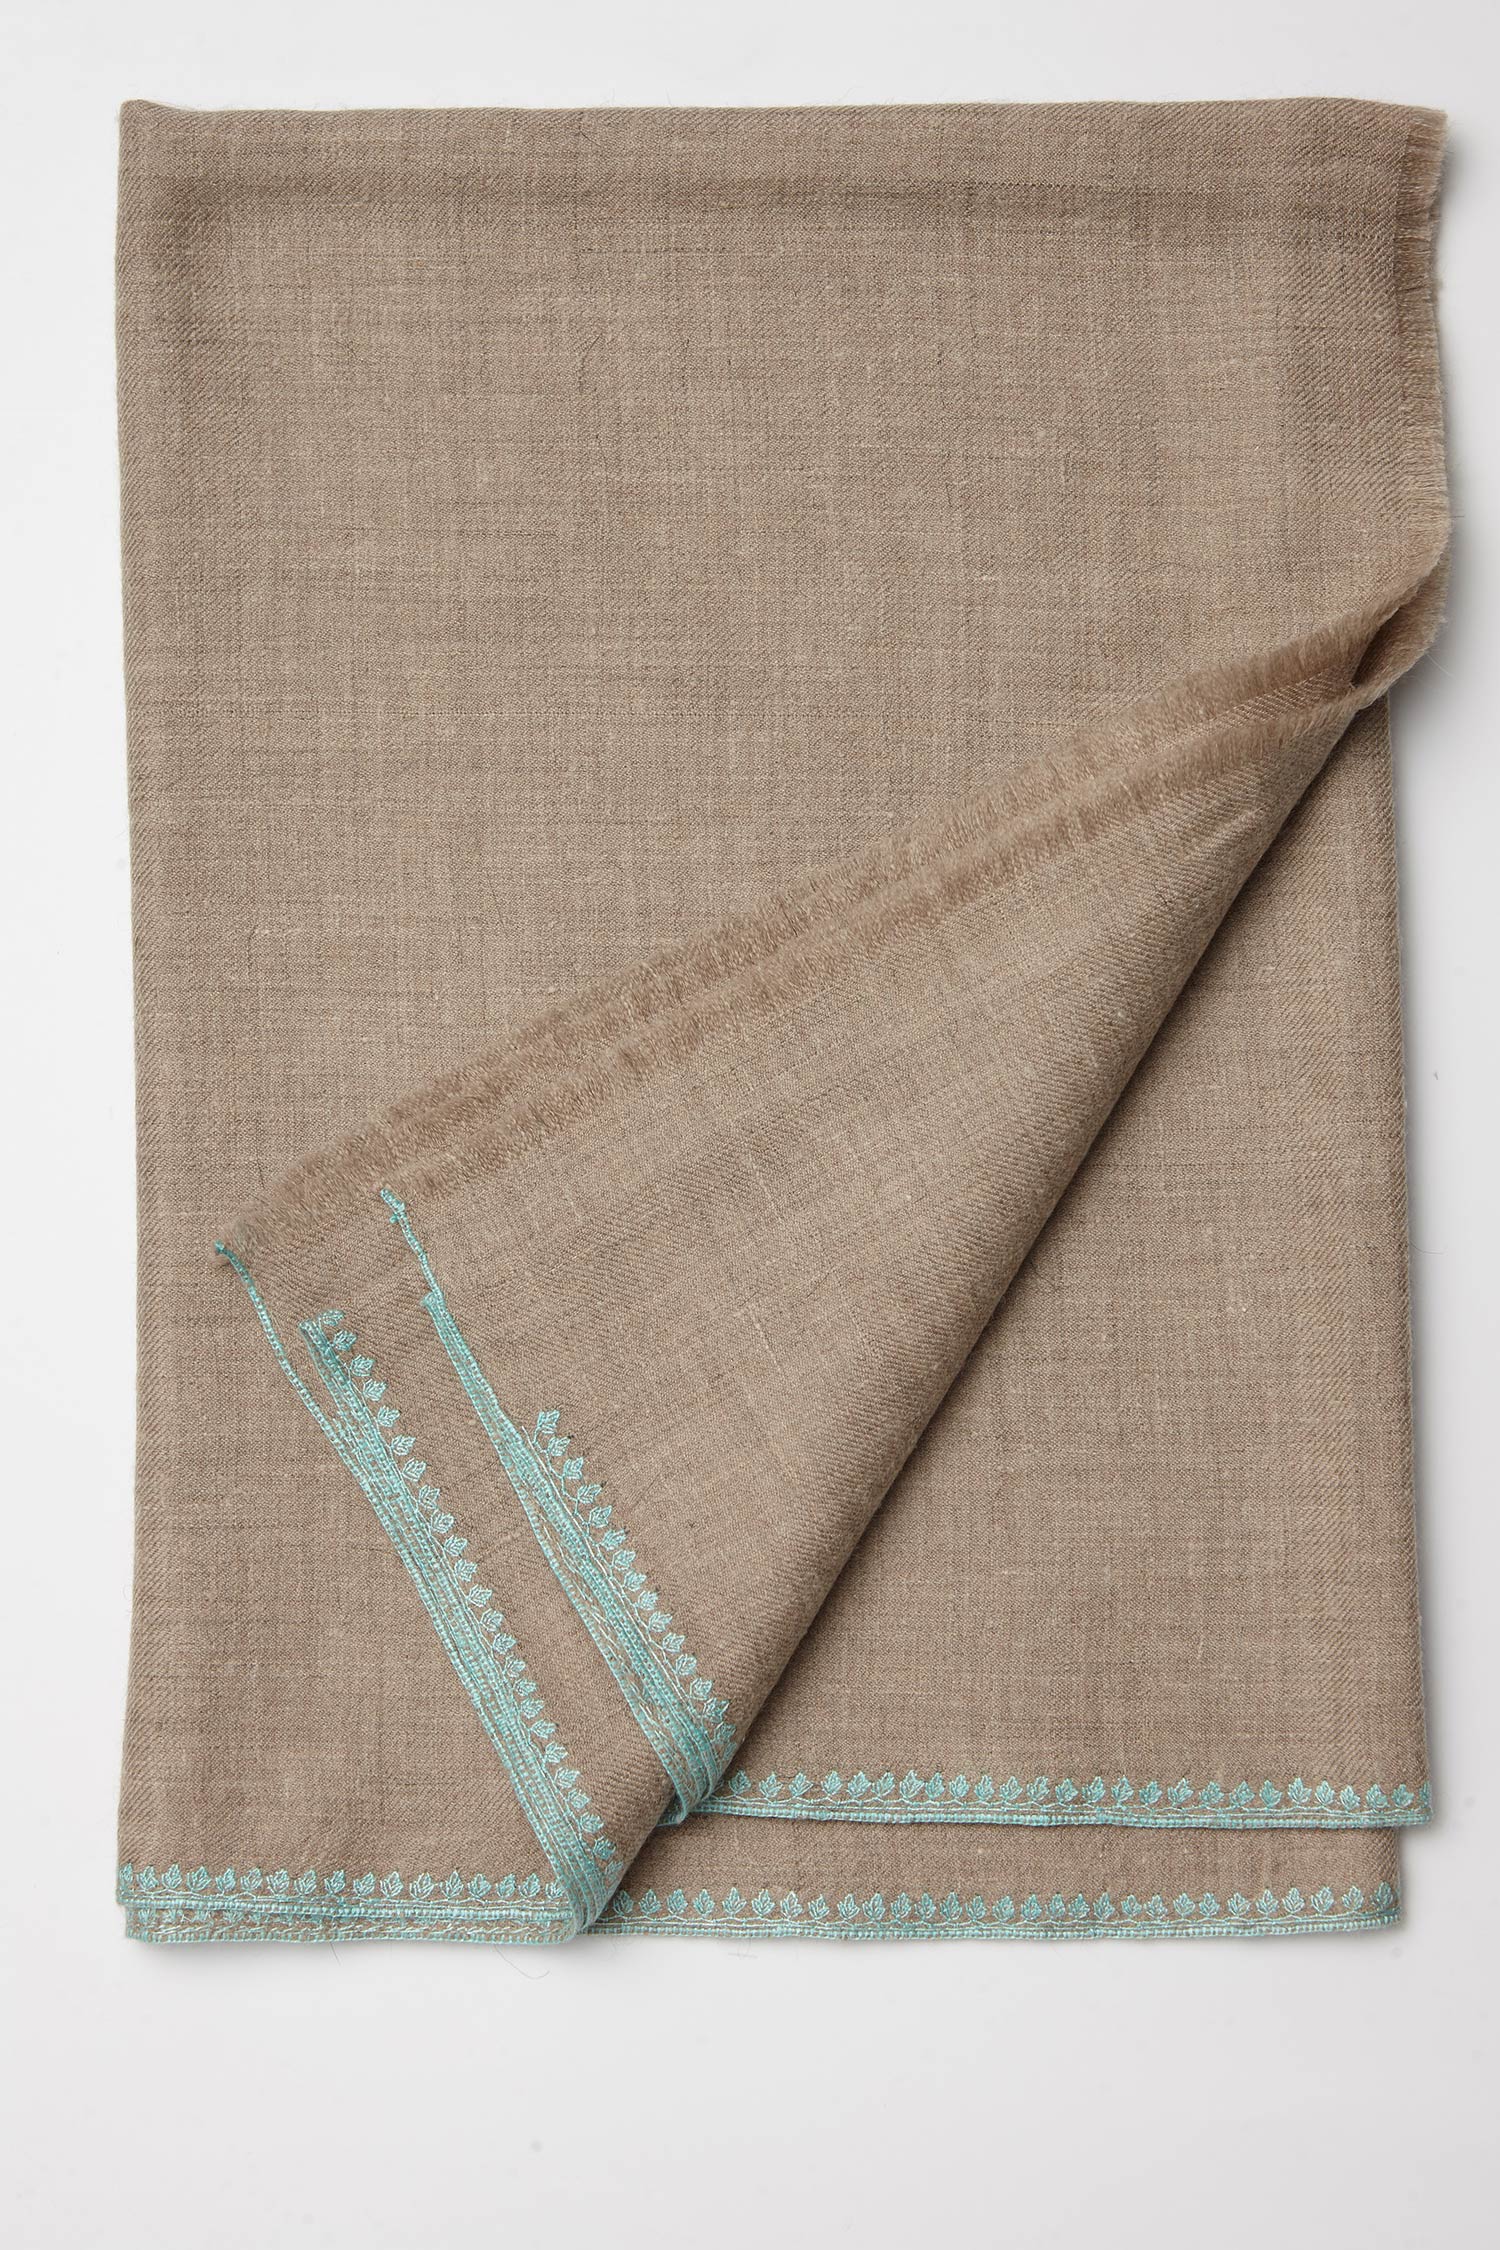 SUHANA by YASBÏS EMBROIDERED CASHMERE SCARF NATURAL/Turquoise